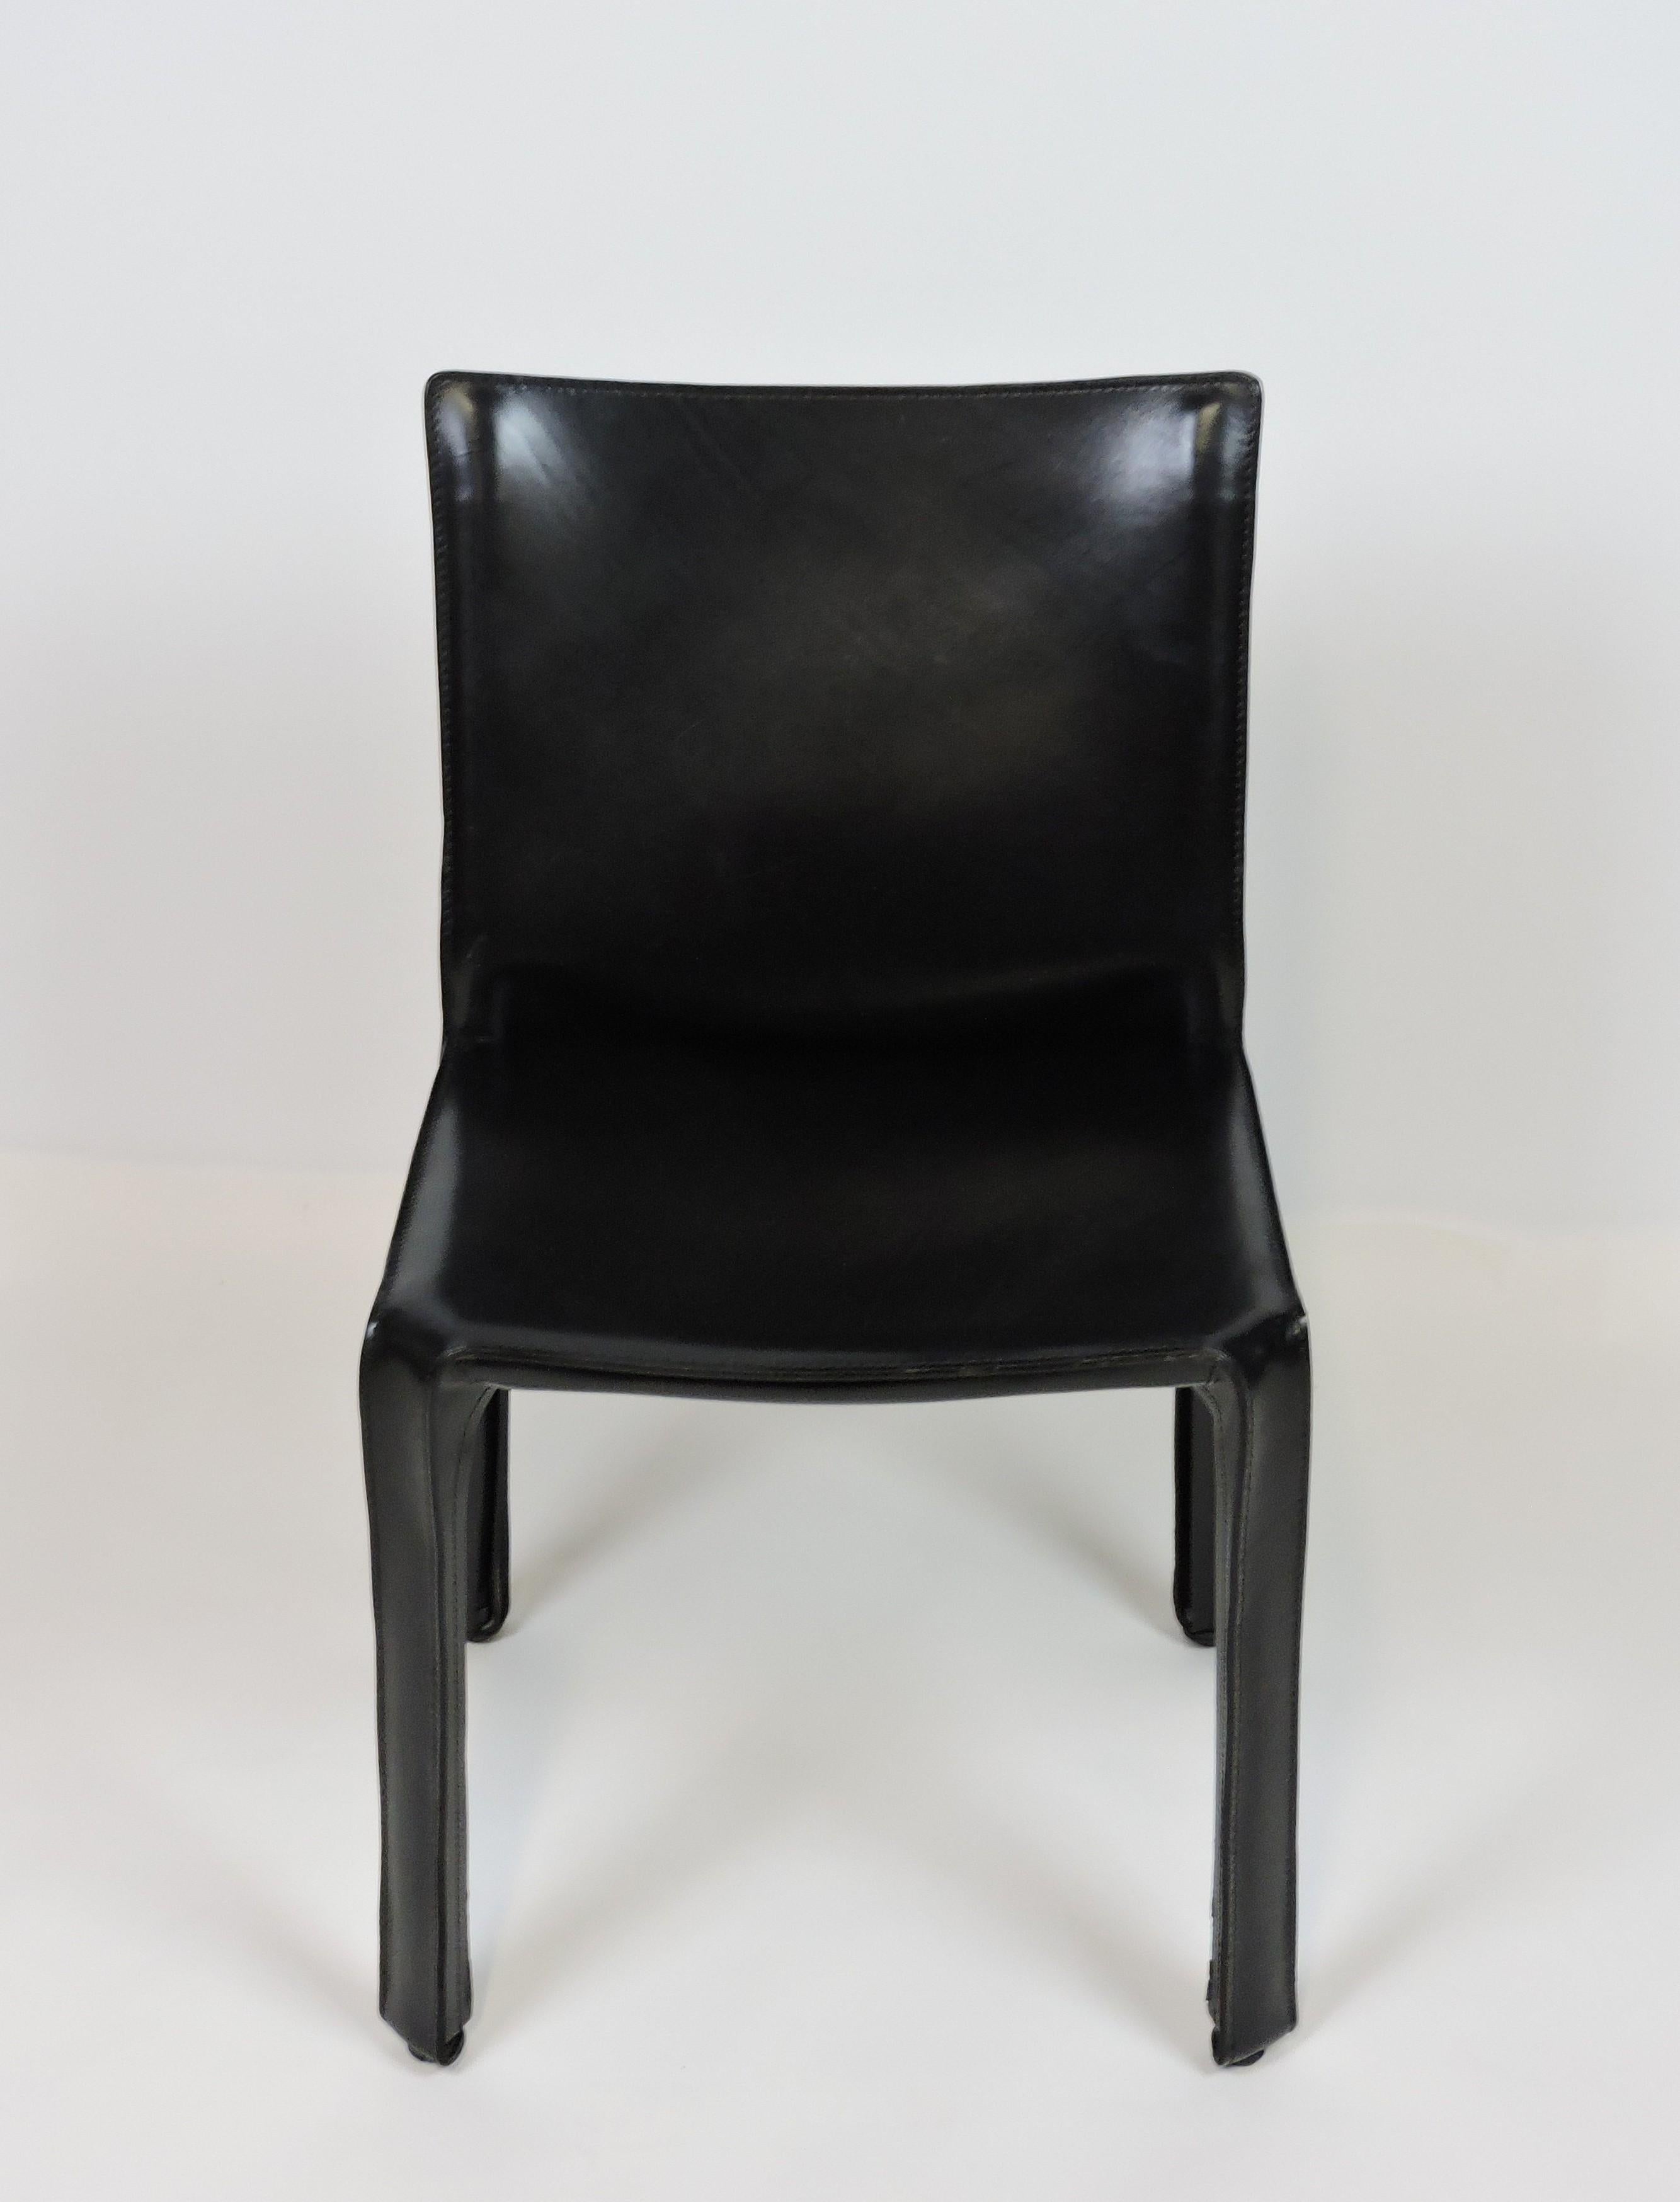 Classic and unique CAB 412 chair designed by Mario Bellini in 1977. This chair is constructed of high quality black Italian leather that zips over a steel frame. Great for use as a side, dining, or office chair. Cassina stamp on bottom.
 